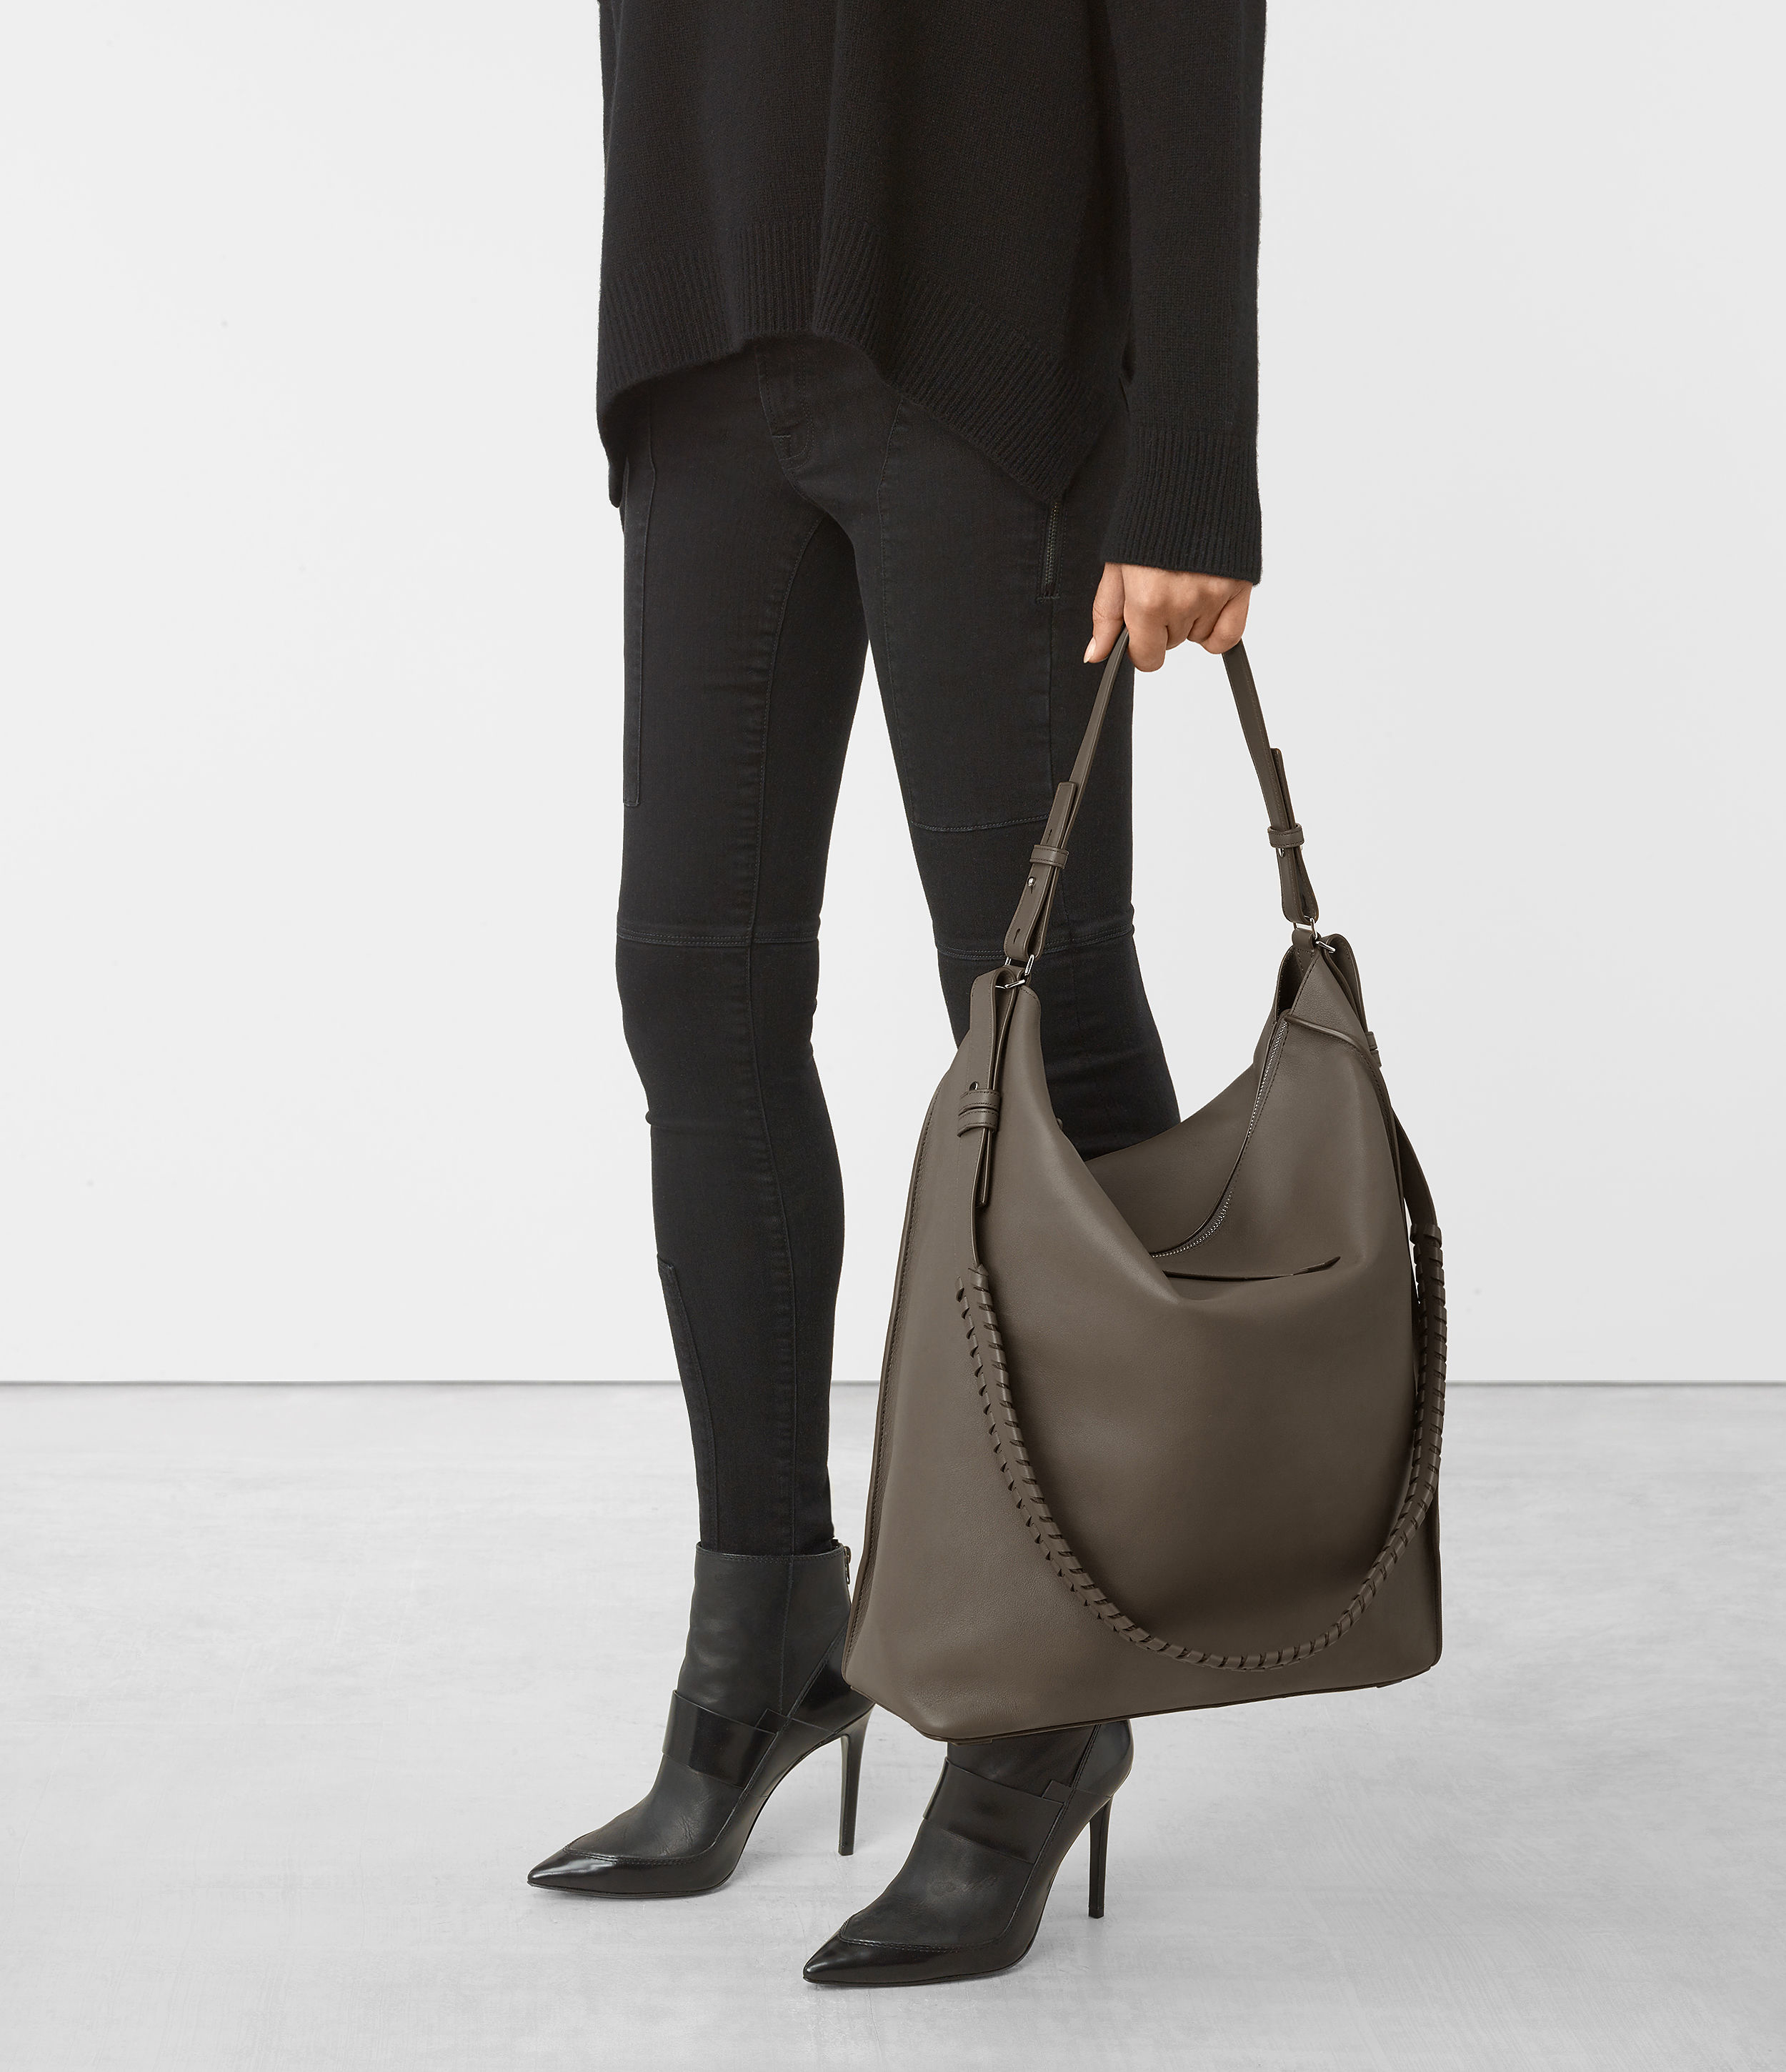 AllSaints Leather Kita Large North South Tote in Mink Grey (Gray) - Lyst